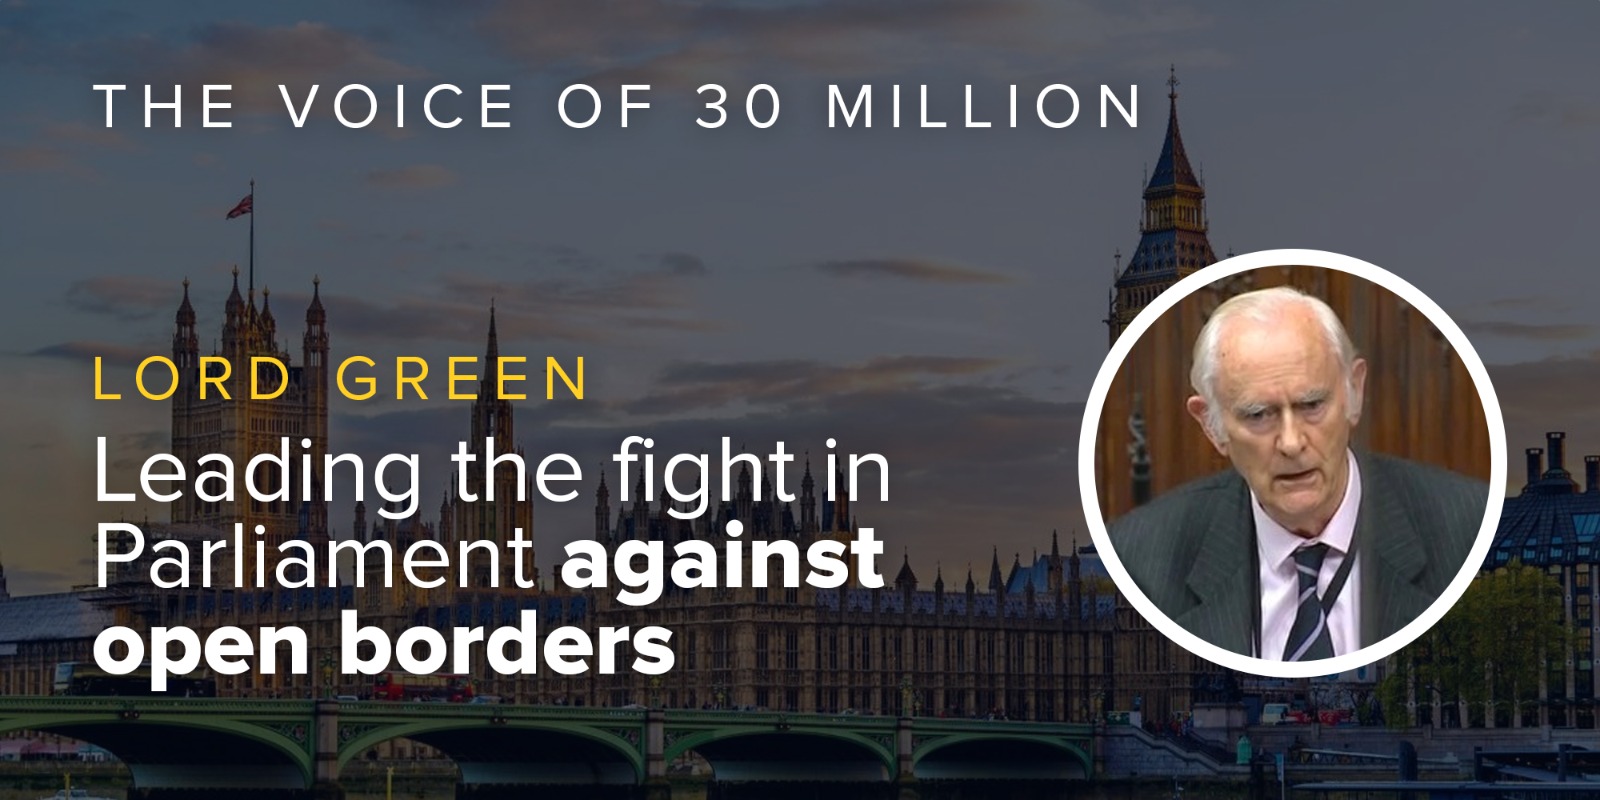 migration-watch-co-founder-lord-green-leads-fightback-against-open-borders-in-parliament